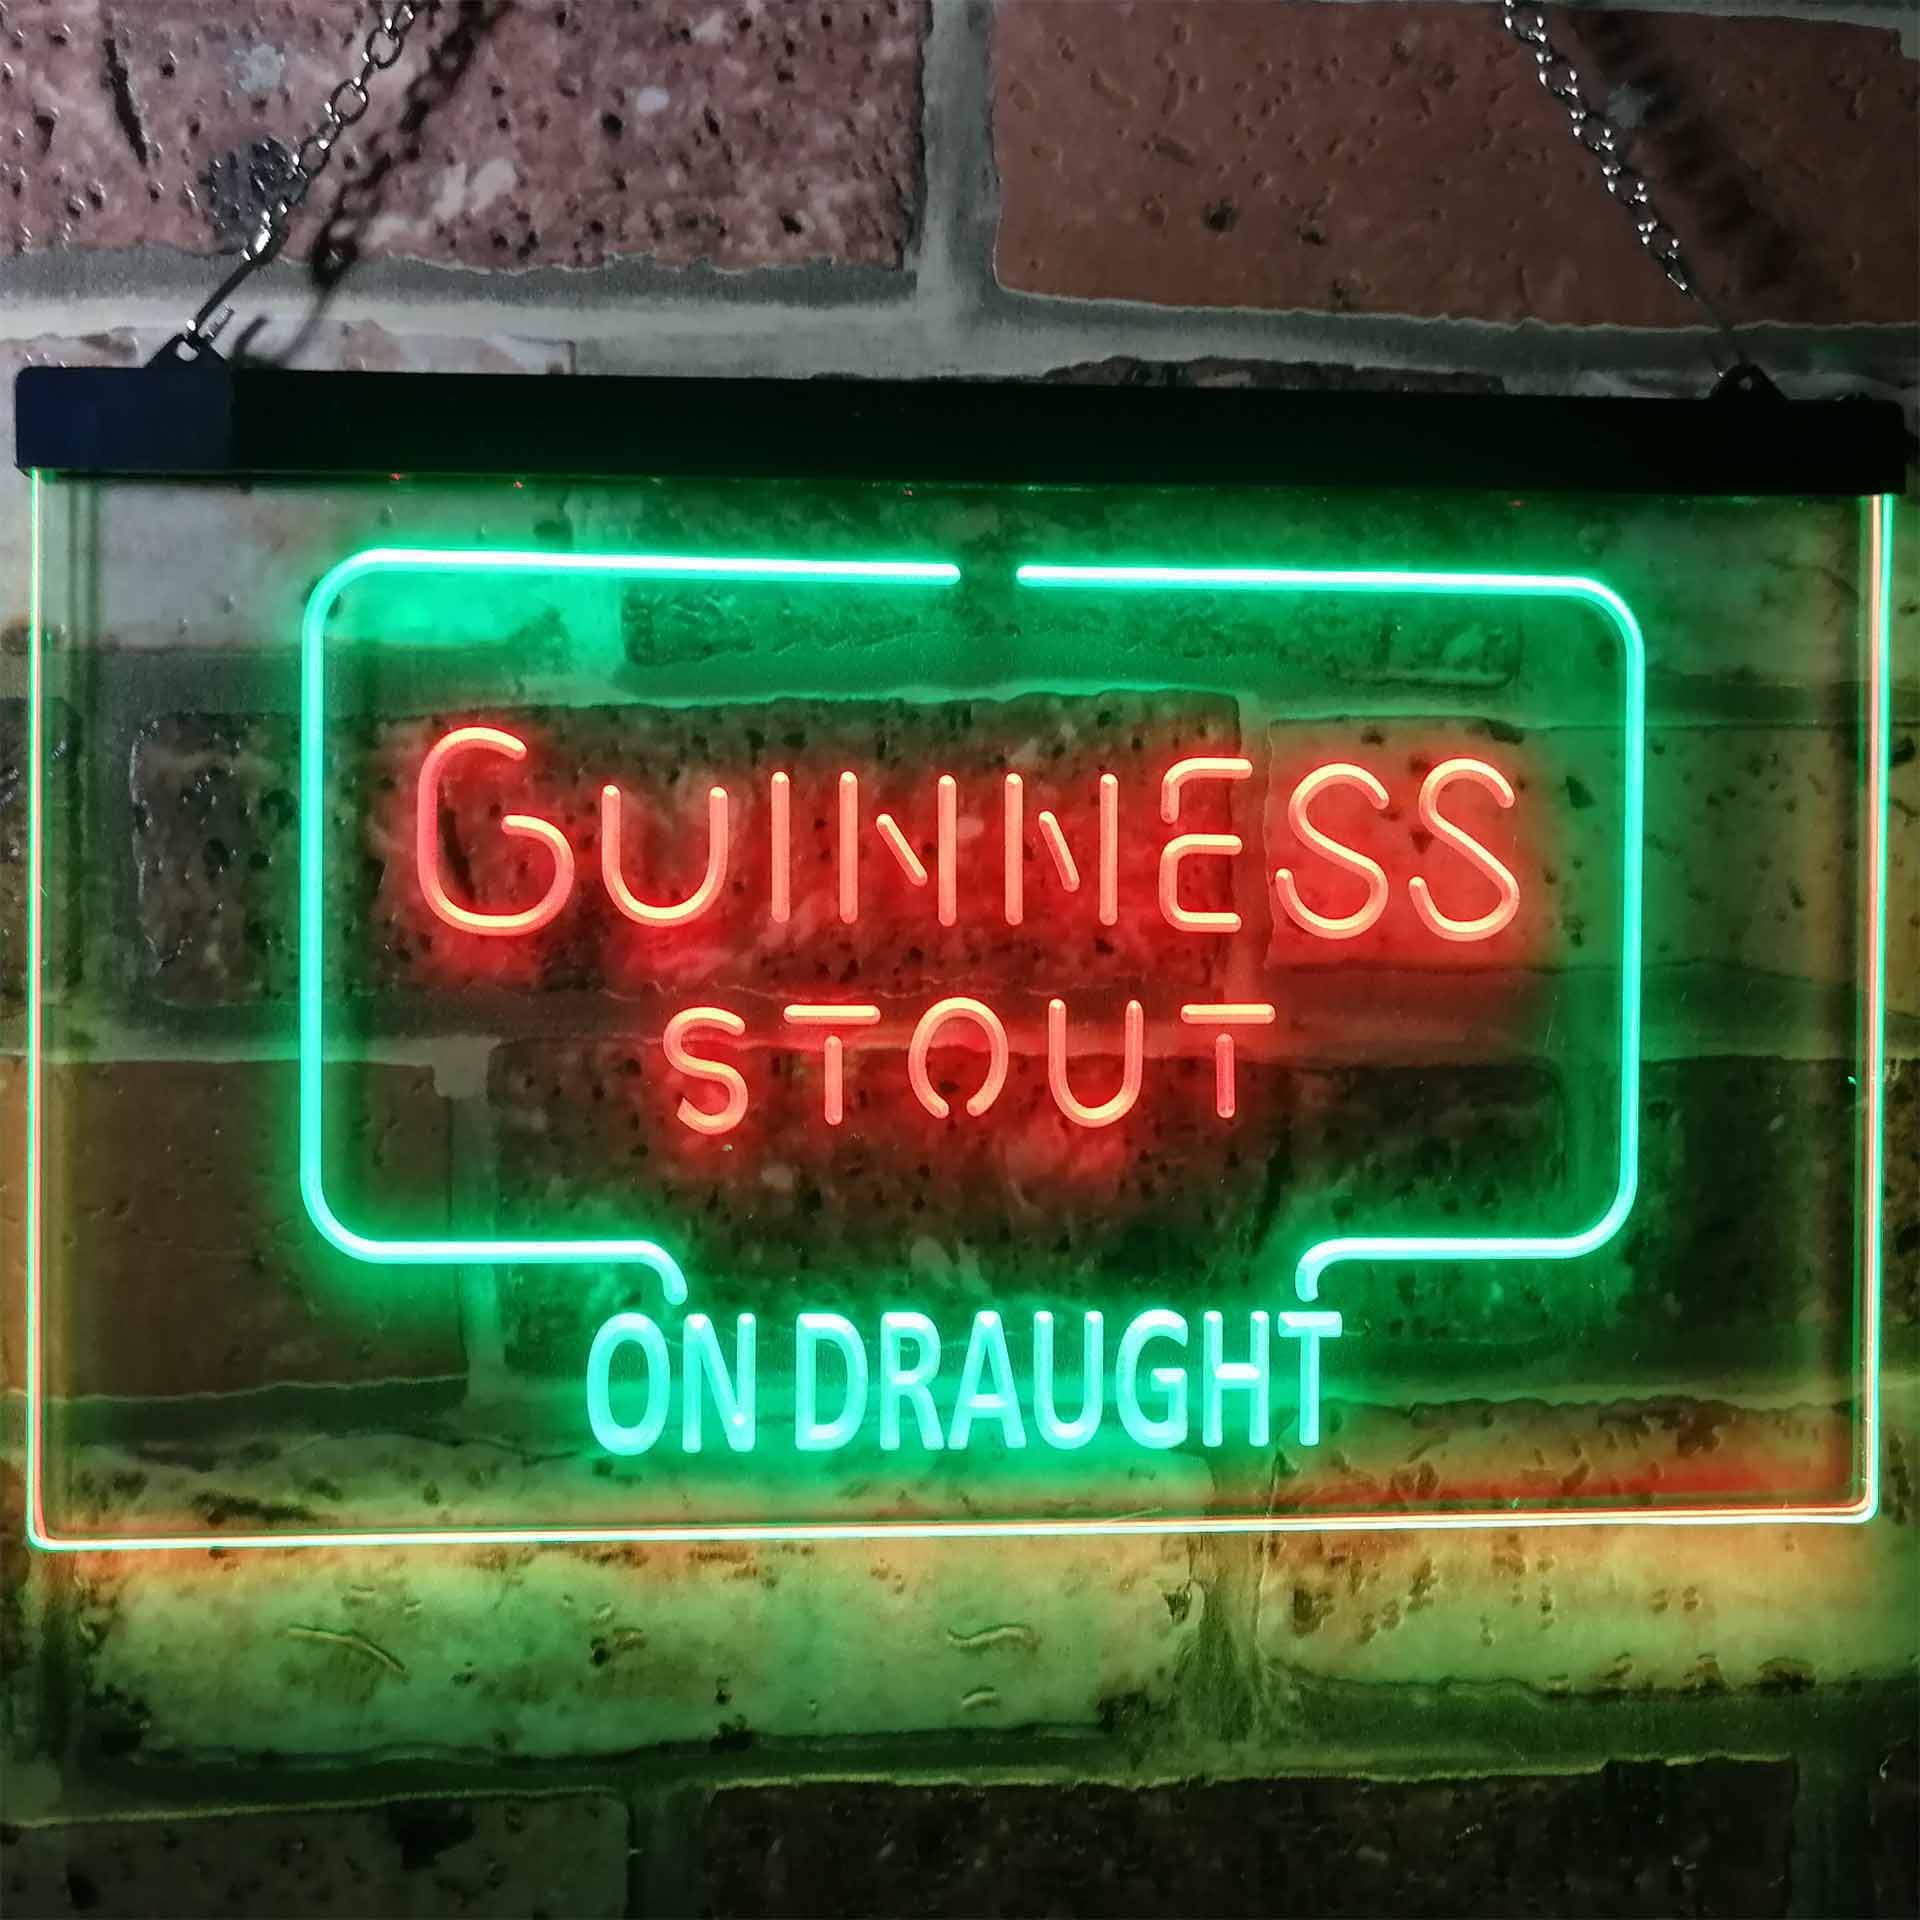 Guinness Dry Stout On Draught Beer Bar Decor Neon LED Sign